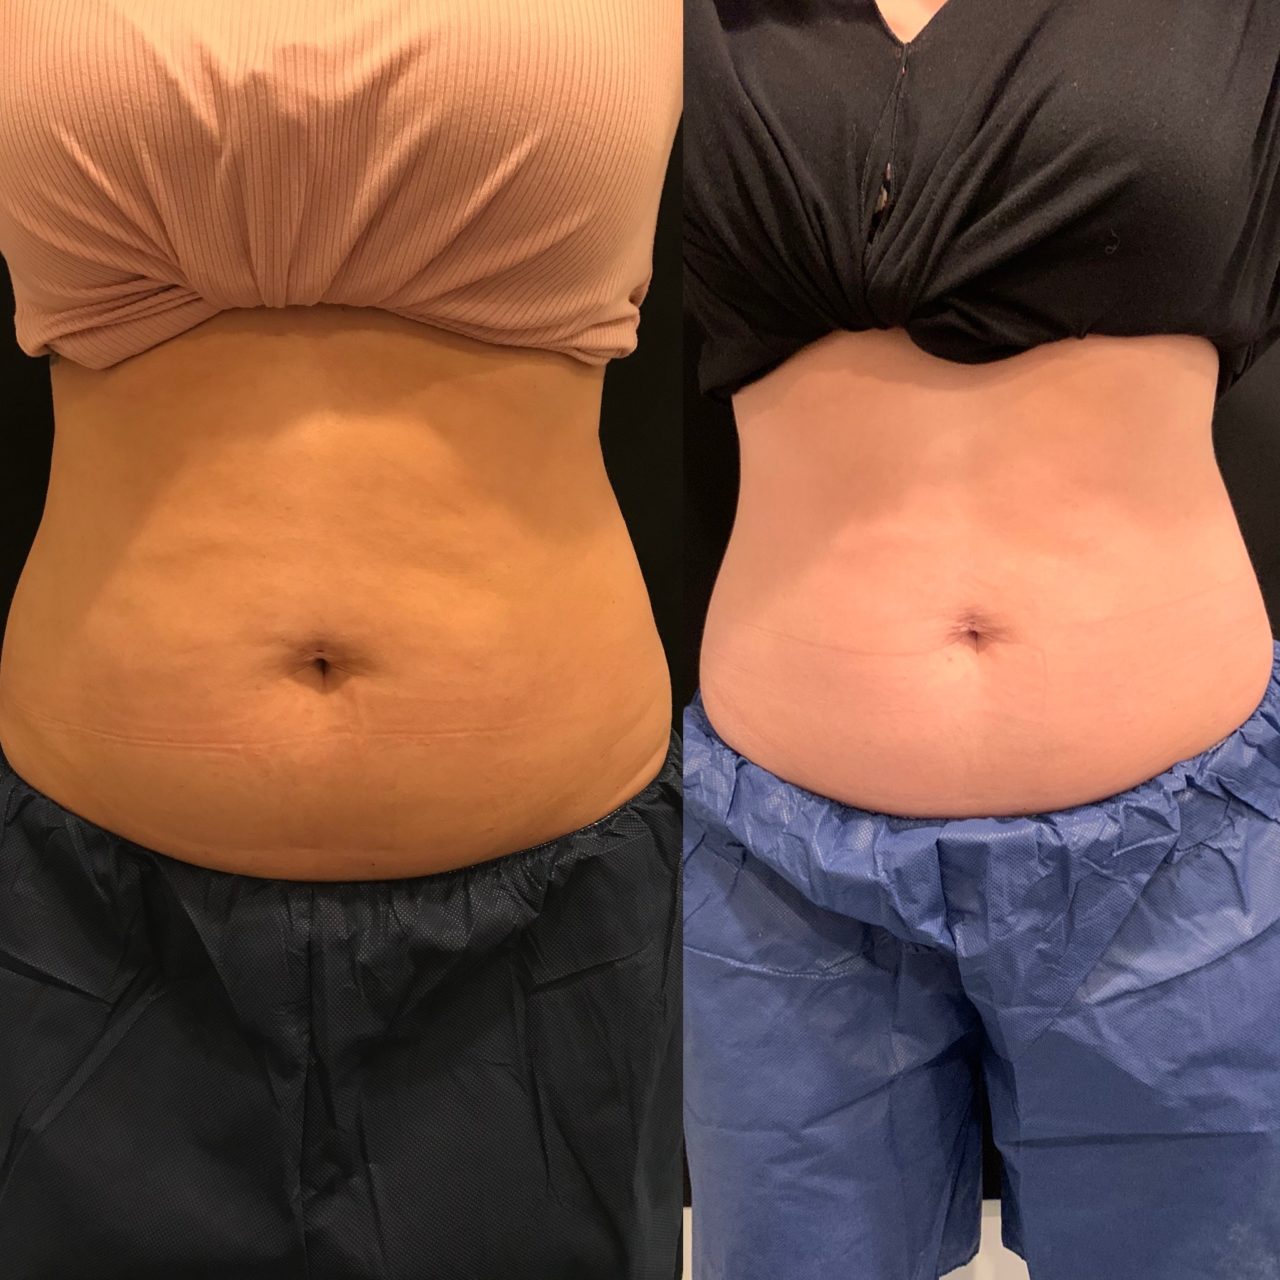 CoolSculpting Elite, 50% Off Packages